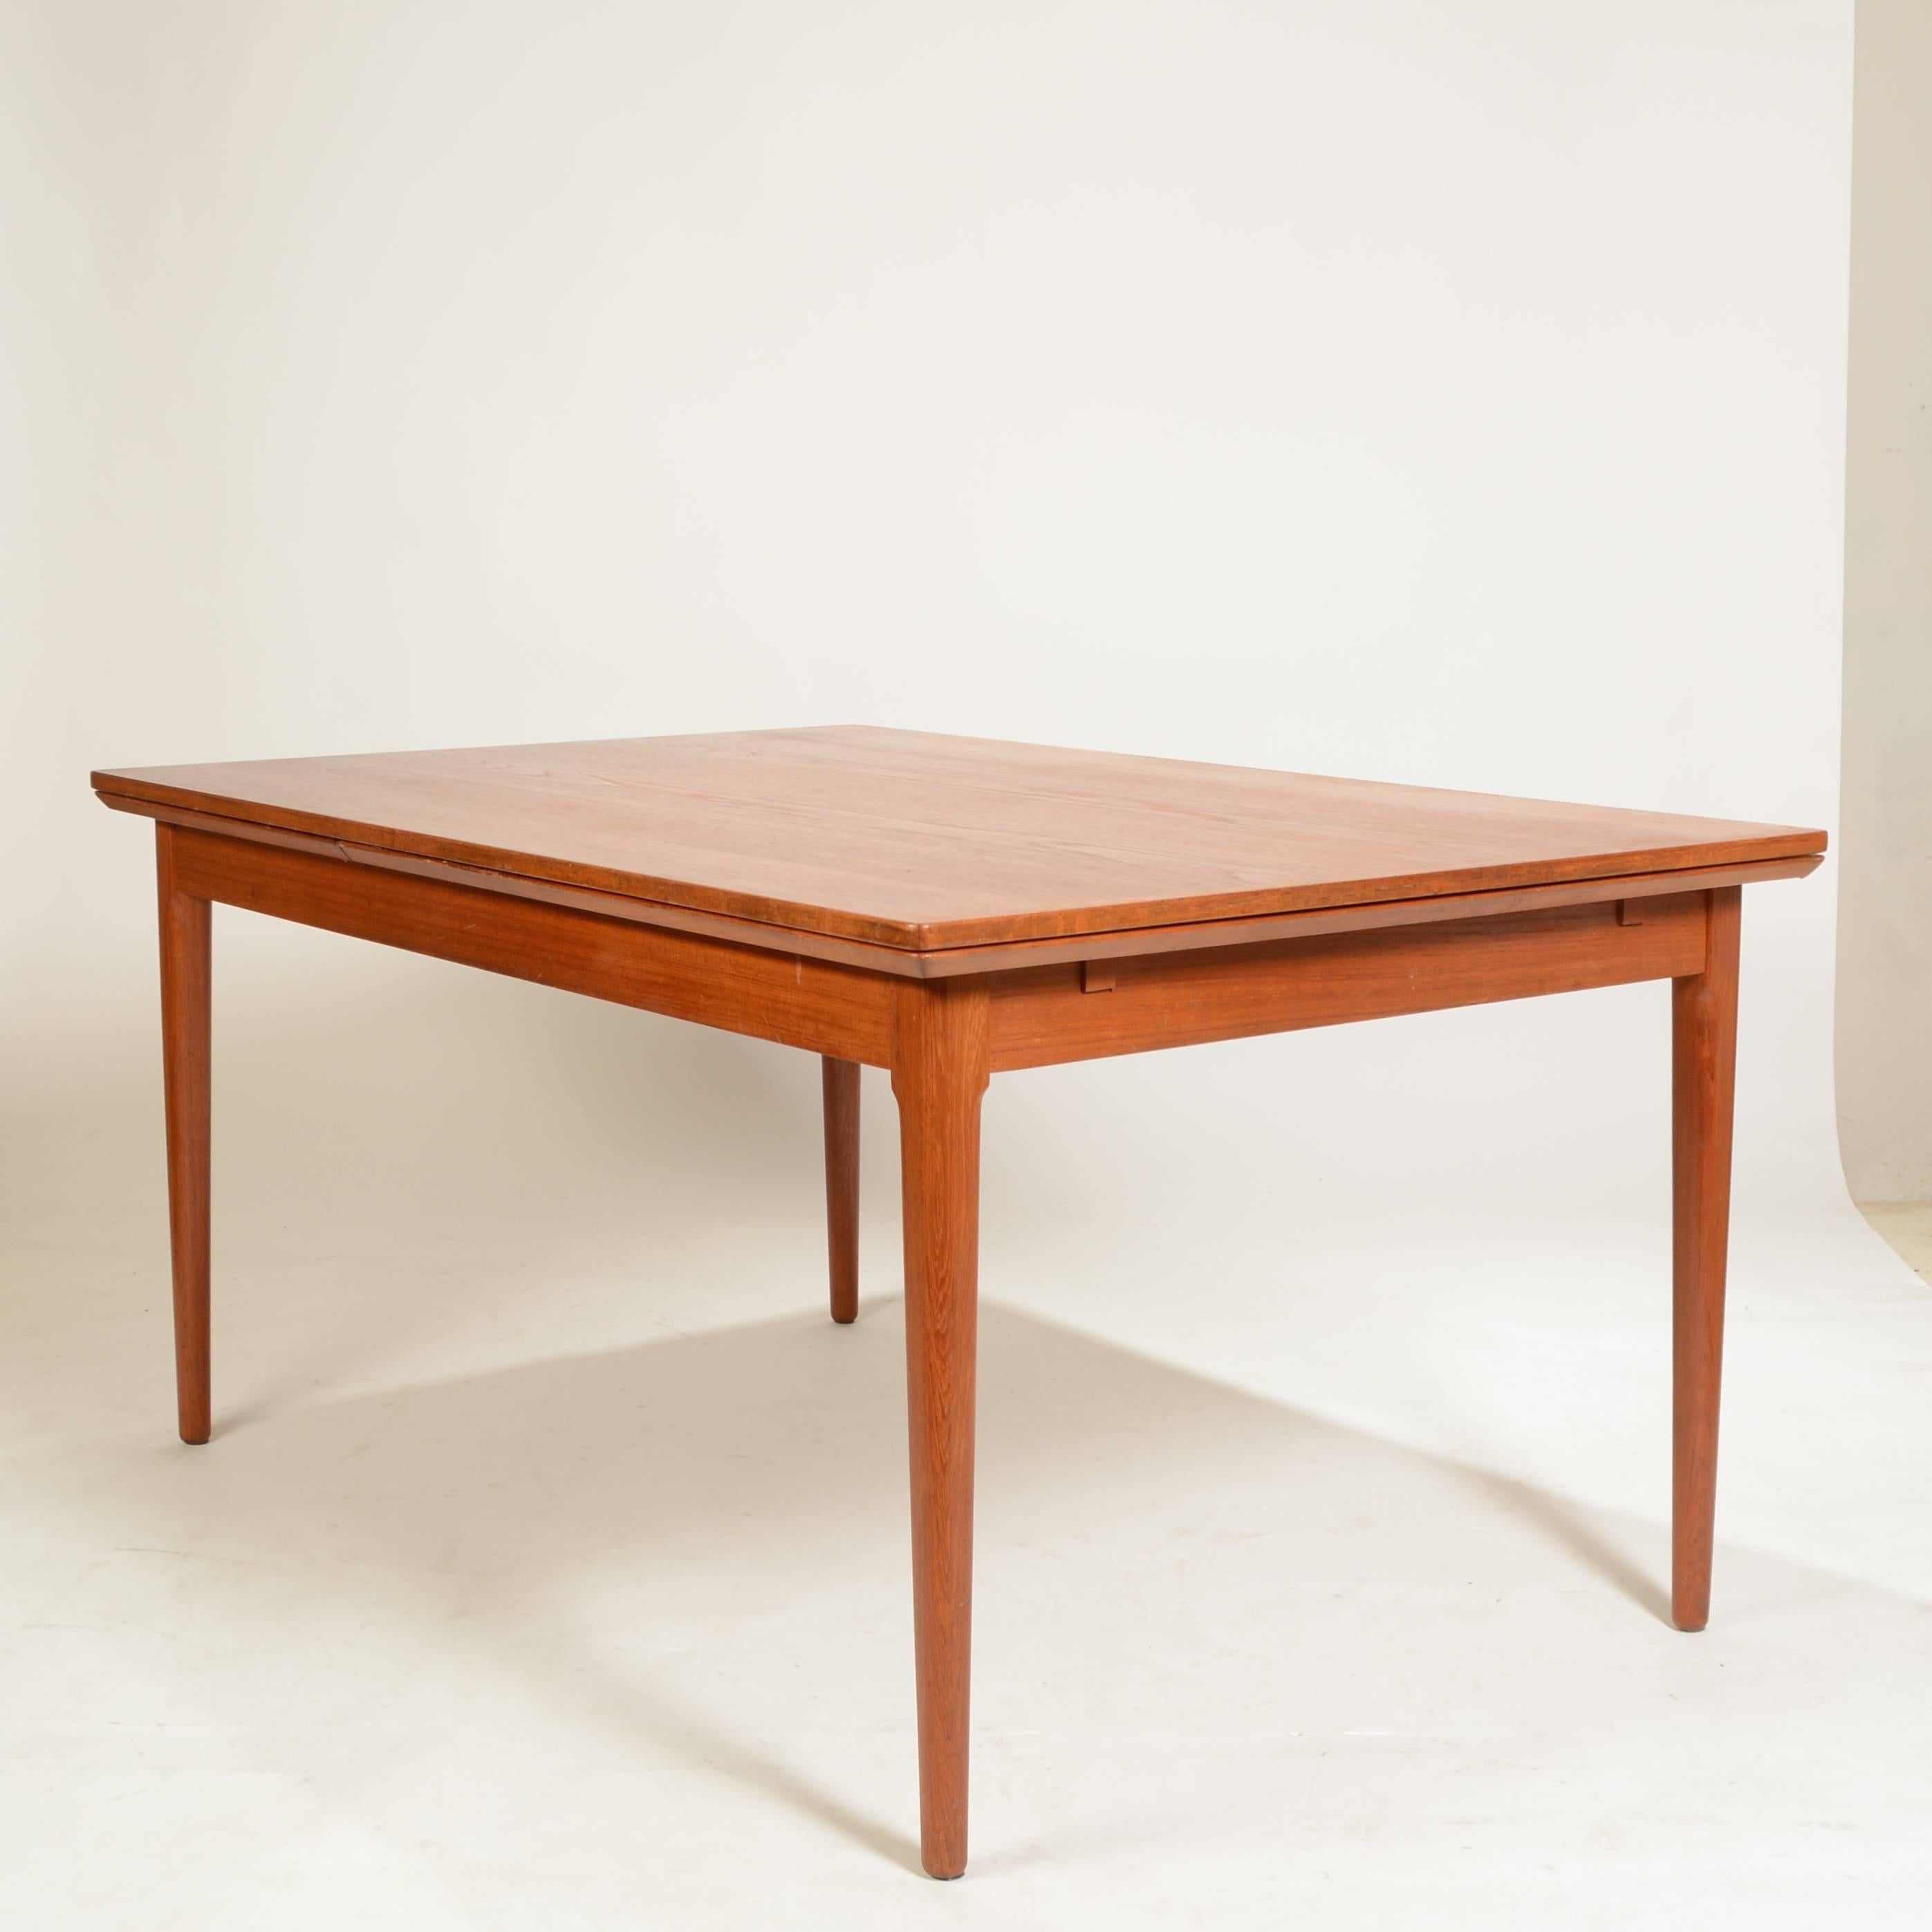 This is a very large and beautiful danish modern dining table by L&F Mobler.  This table is in excellent vintage condition.  